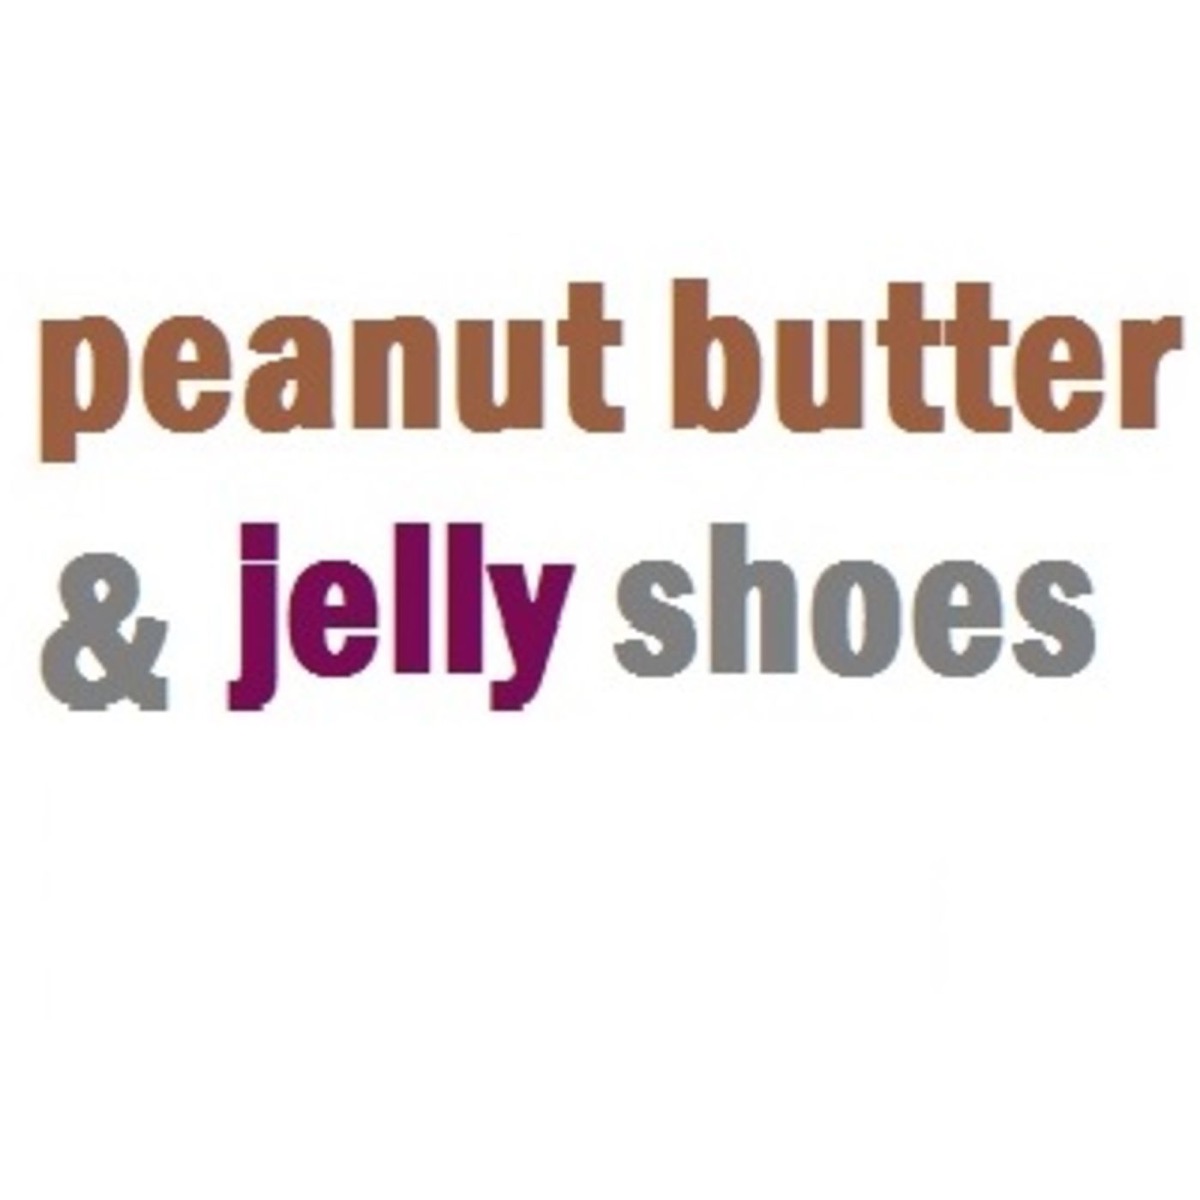 peanut butter jelly shoes